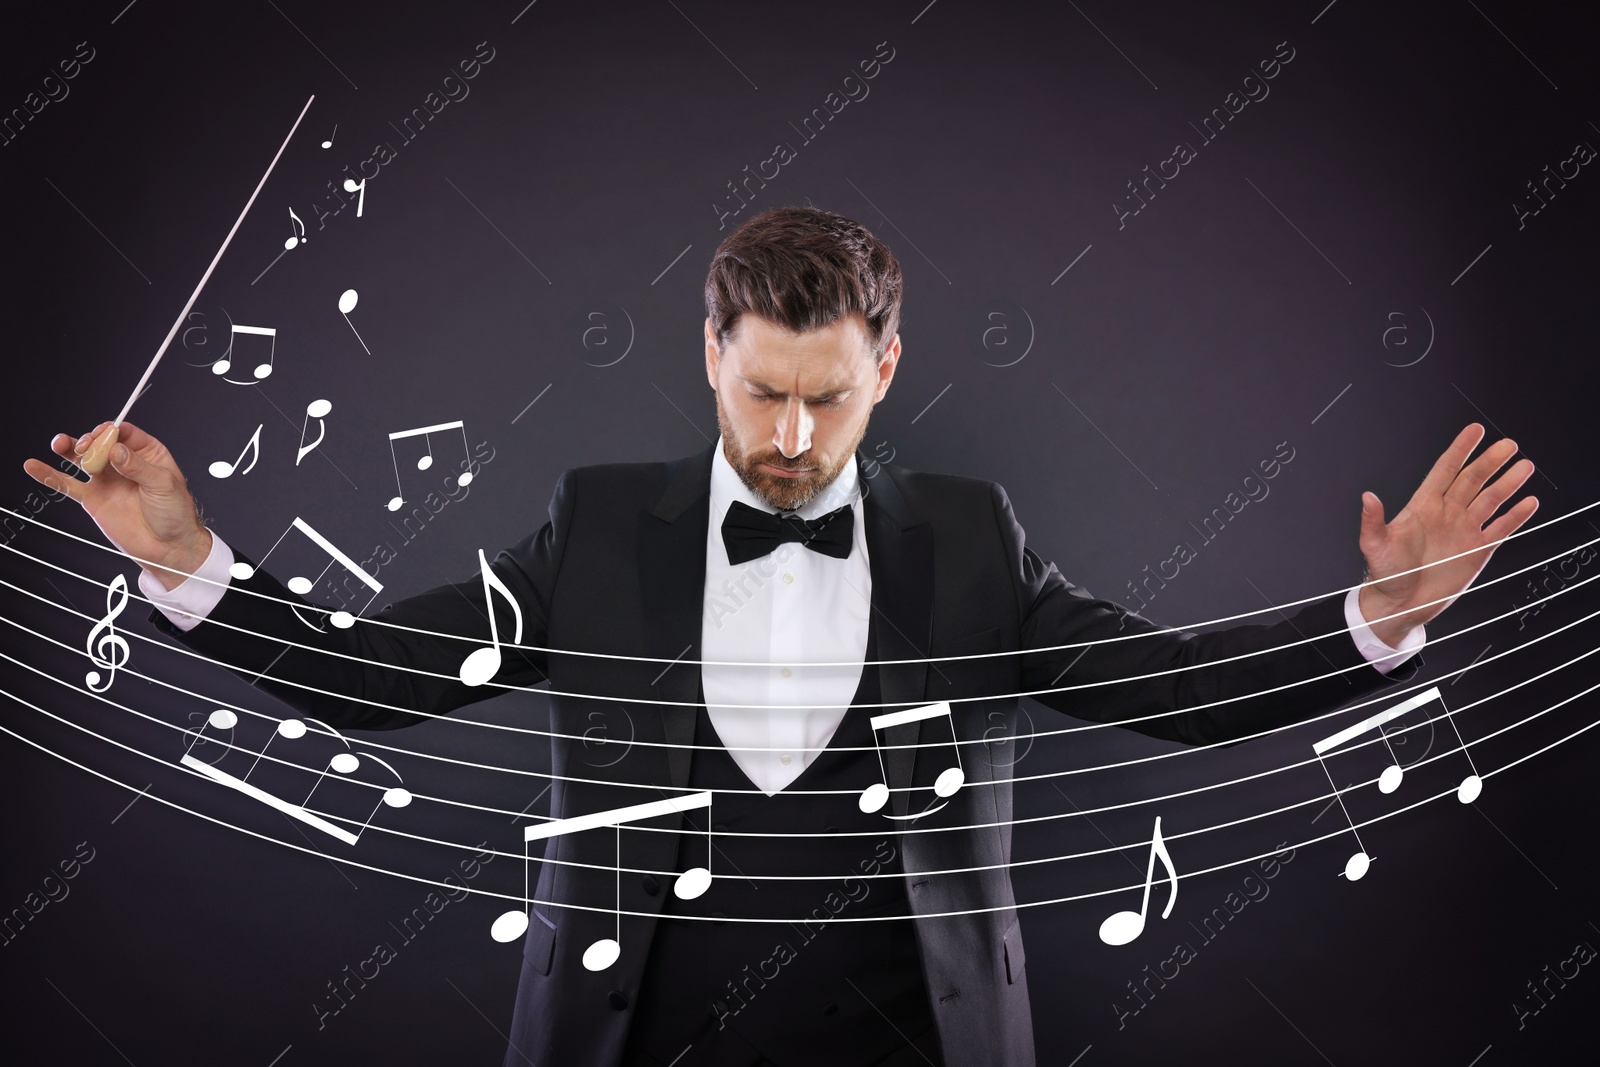 Image of Conductor with baton and music notes on dark background